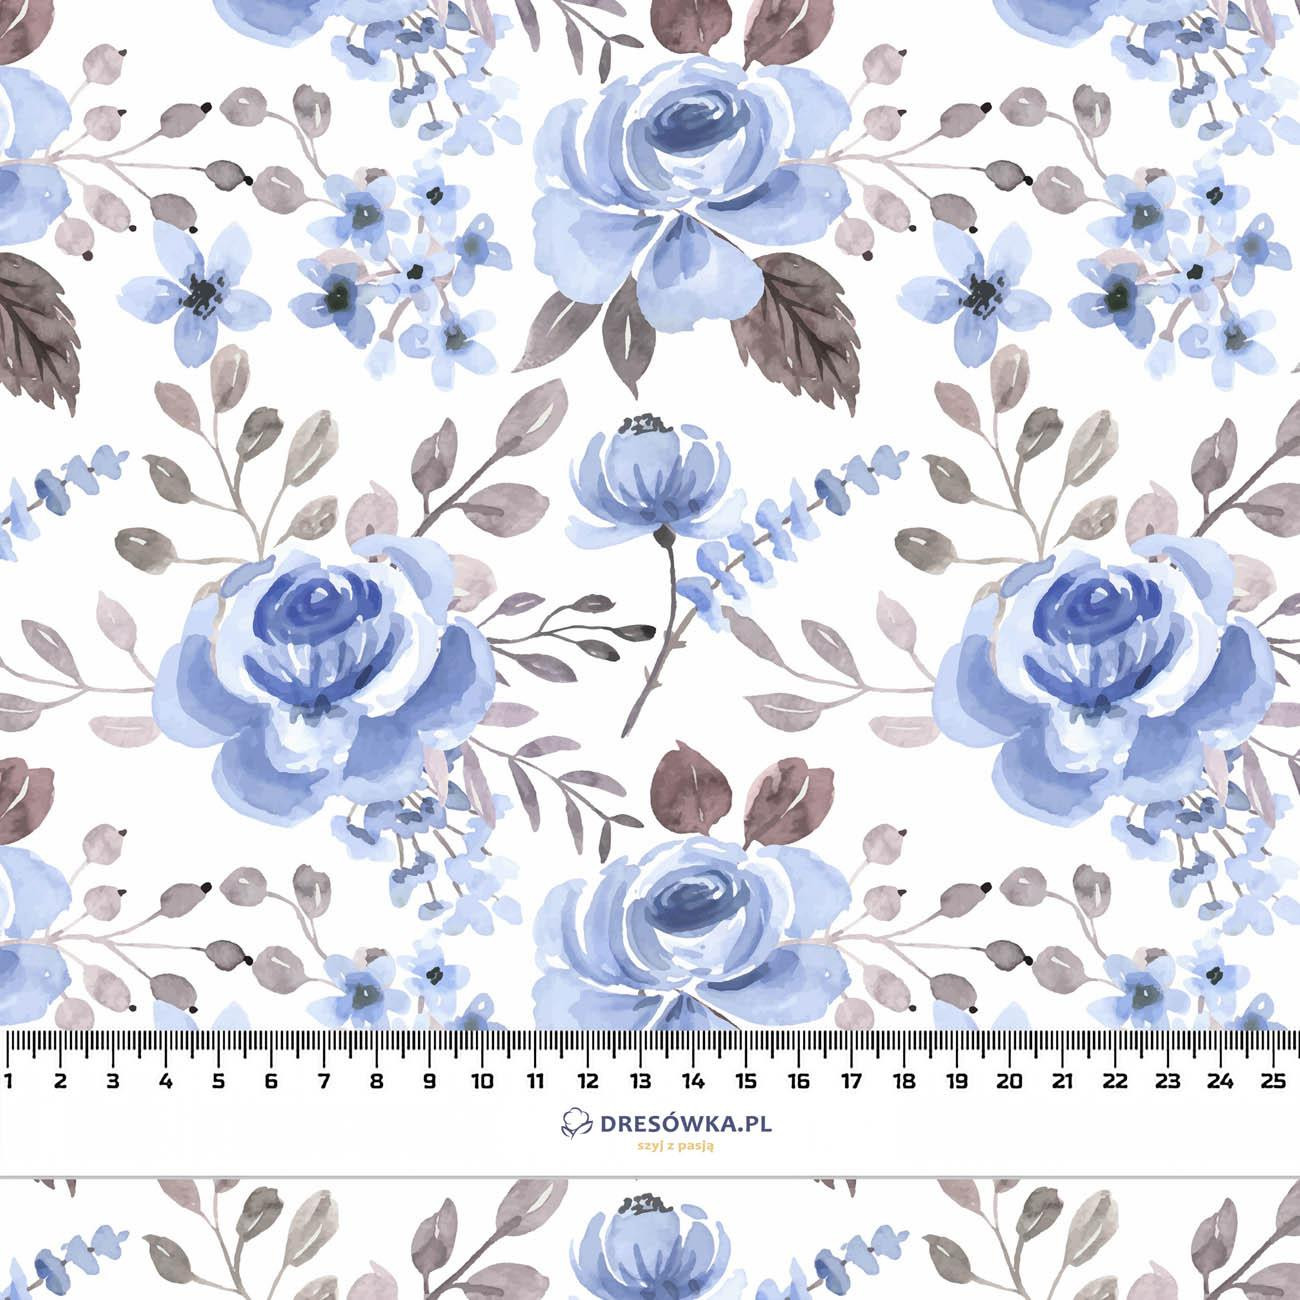 BLUE FLOWERS - Cotton woven fabric